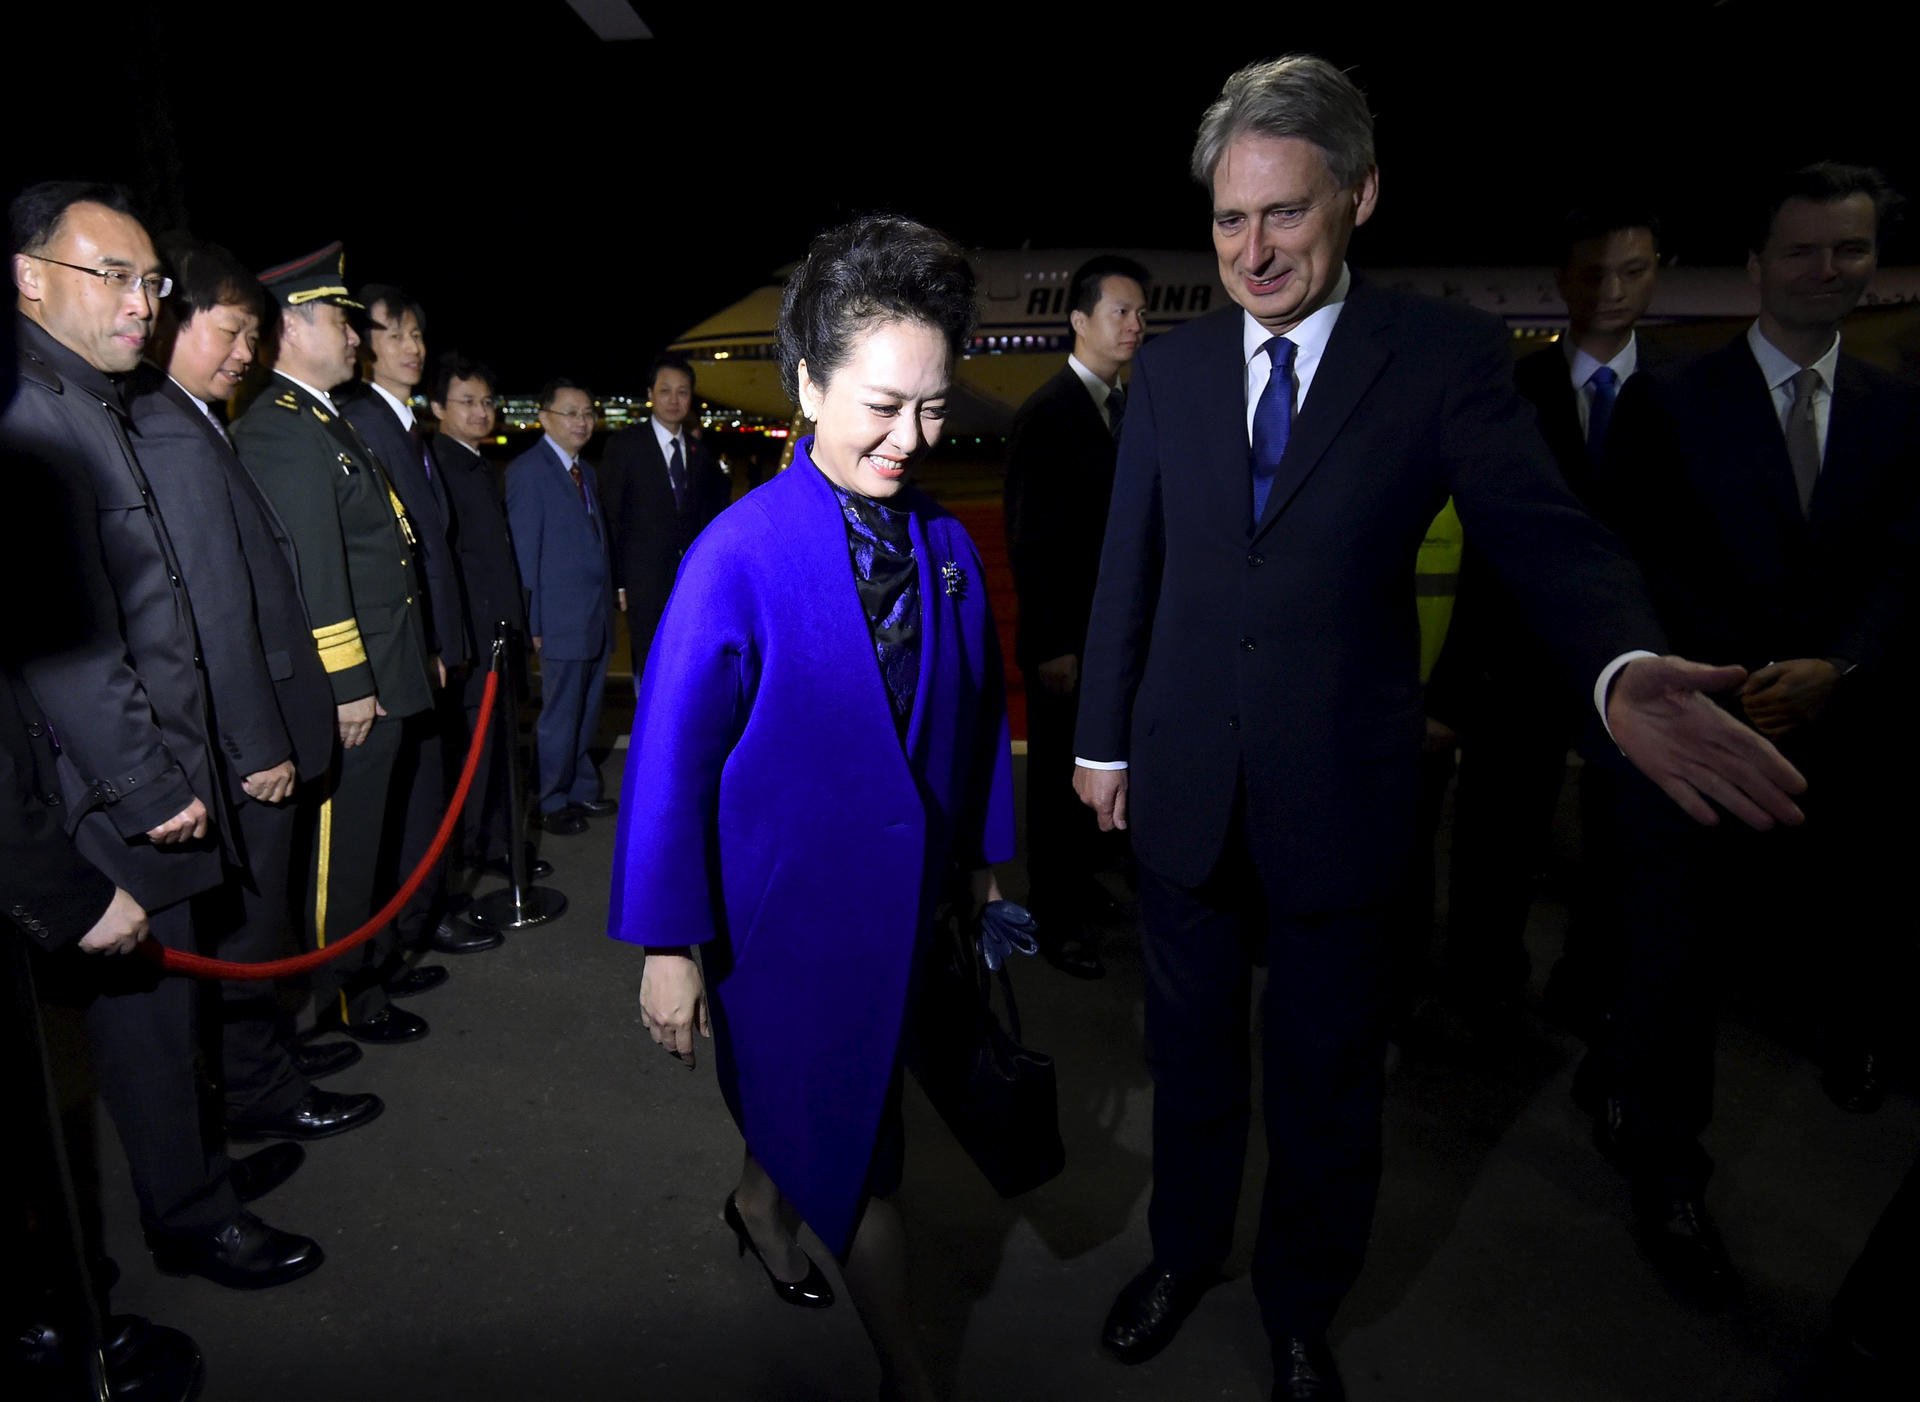 Peng Liyuan, wife of President Xi Jinping, was welcomed by British Foreign Secretary Philip Hammond during their state visit to the UK. In September, Hammond hailed a reform to Japan's self-defence laws that incensed Beijing. Photo: AP